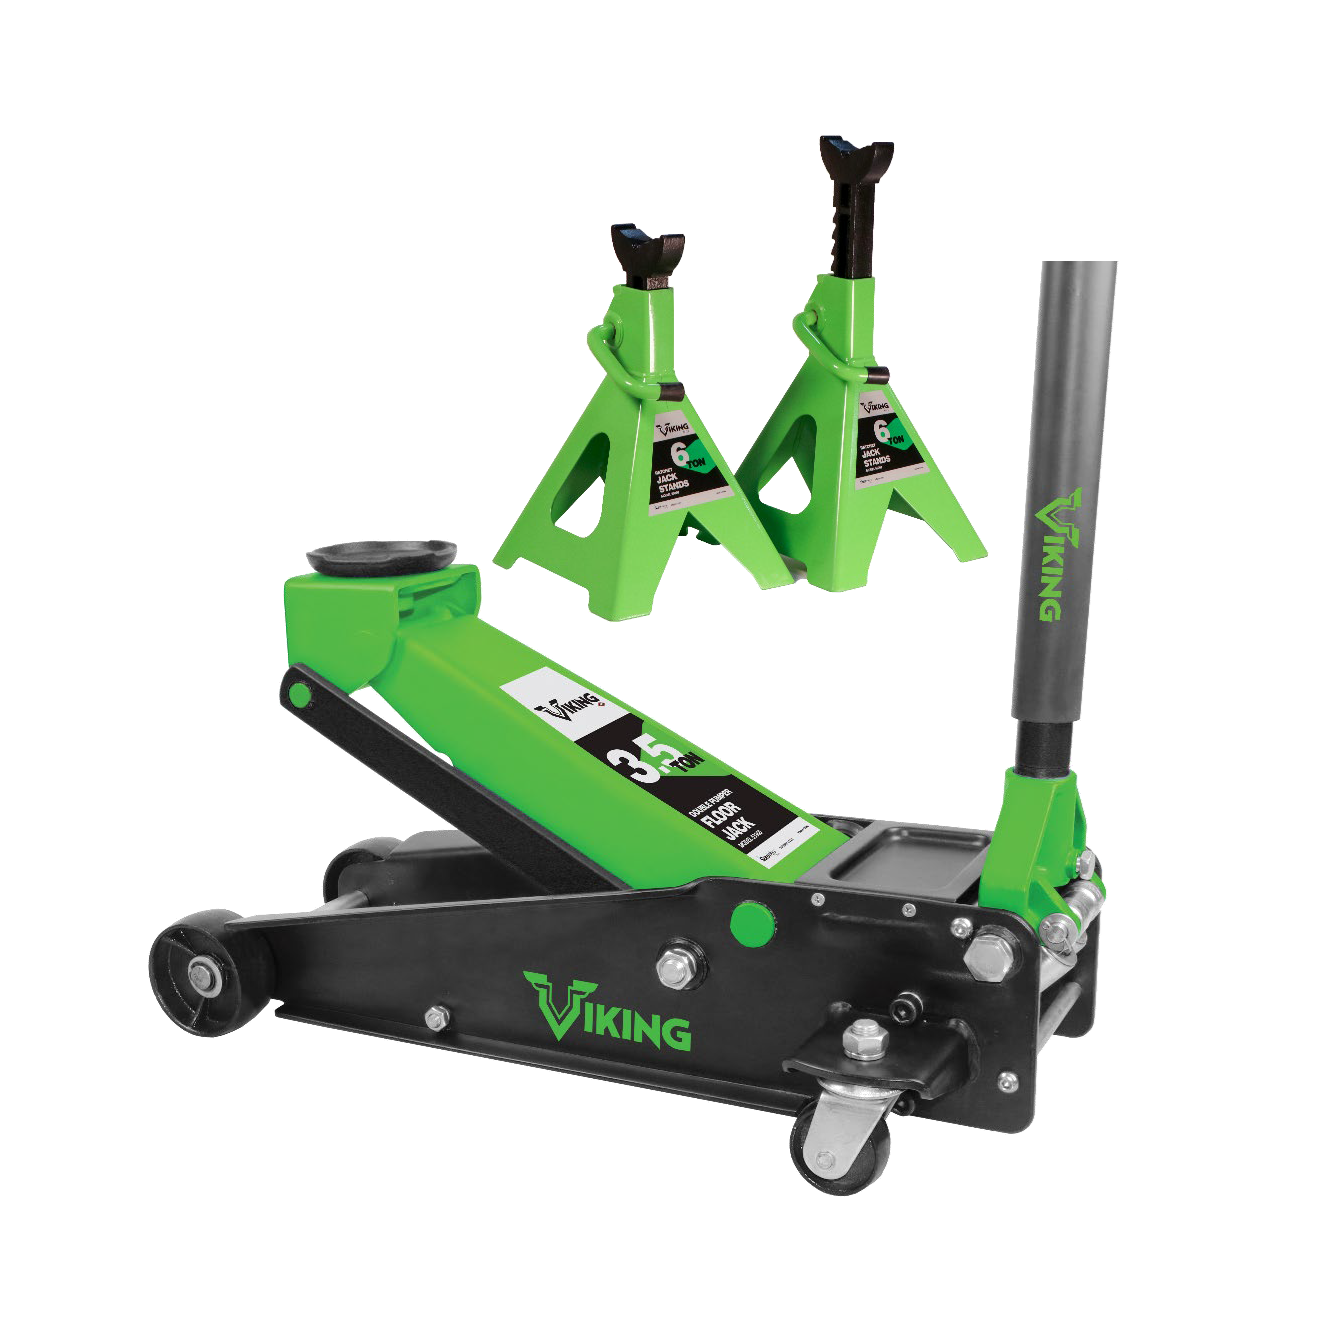 Viking Air Tools - 3.5T FLOOR JACK W/6T SAFETY STANDS PR INCLUDES 6 TON STANDS -  53350JPK